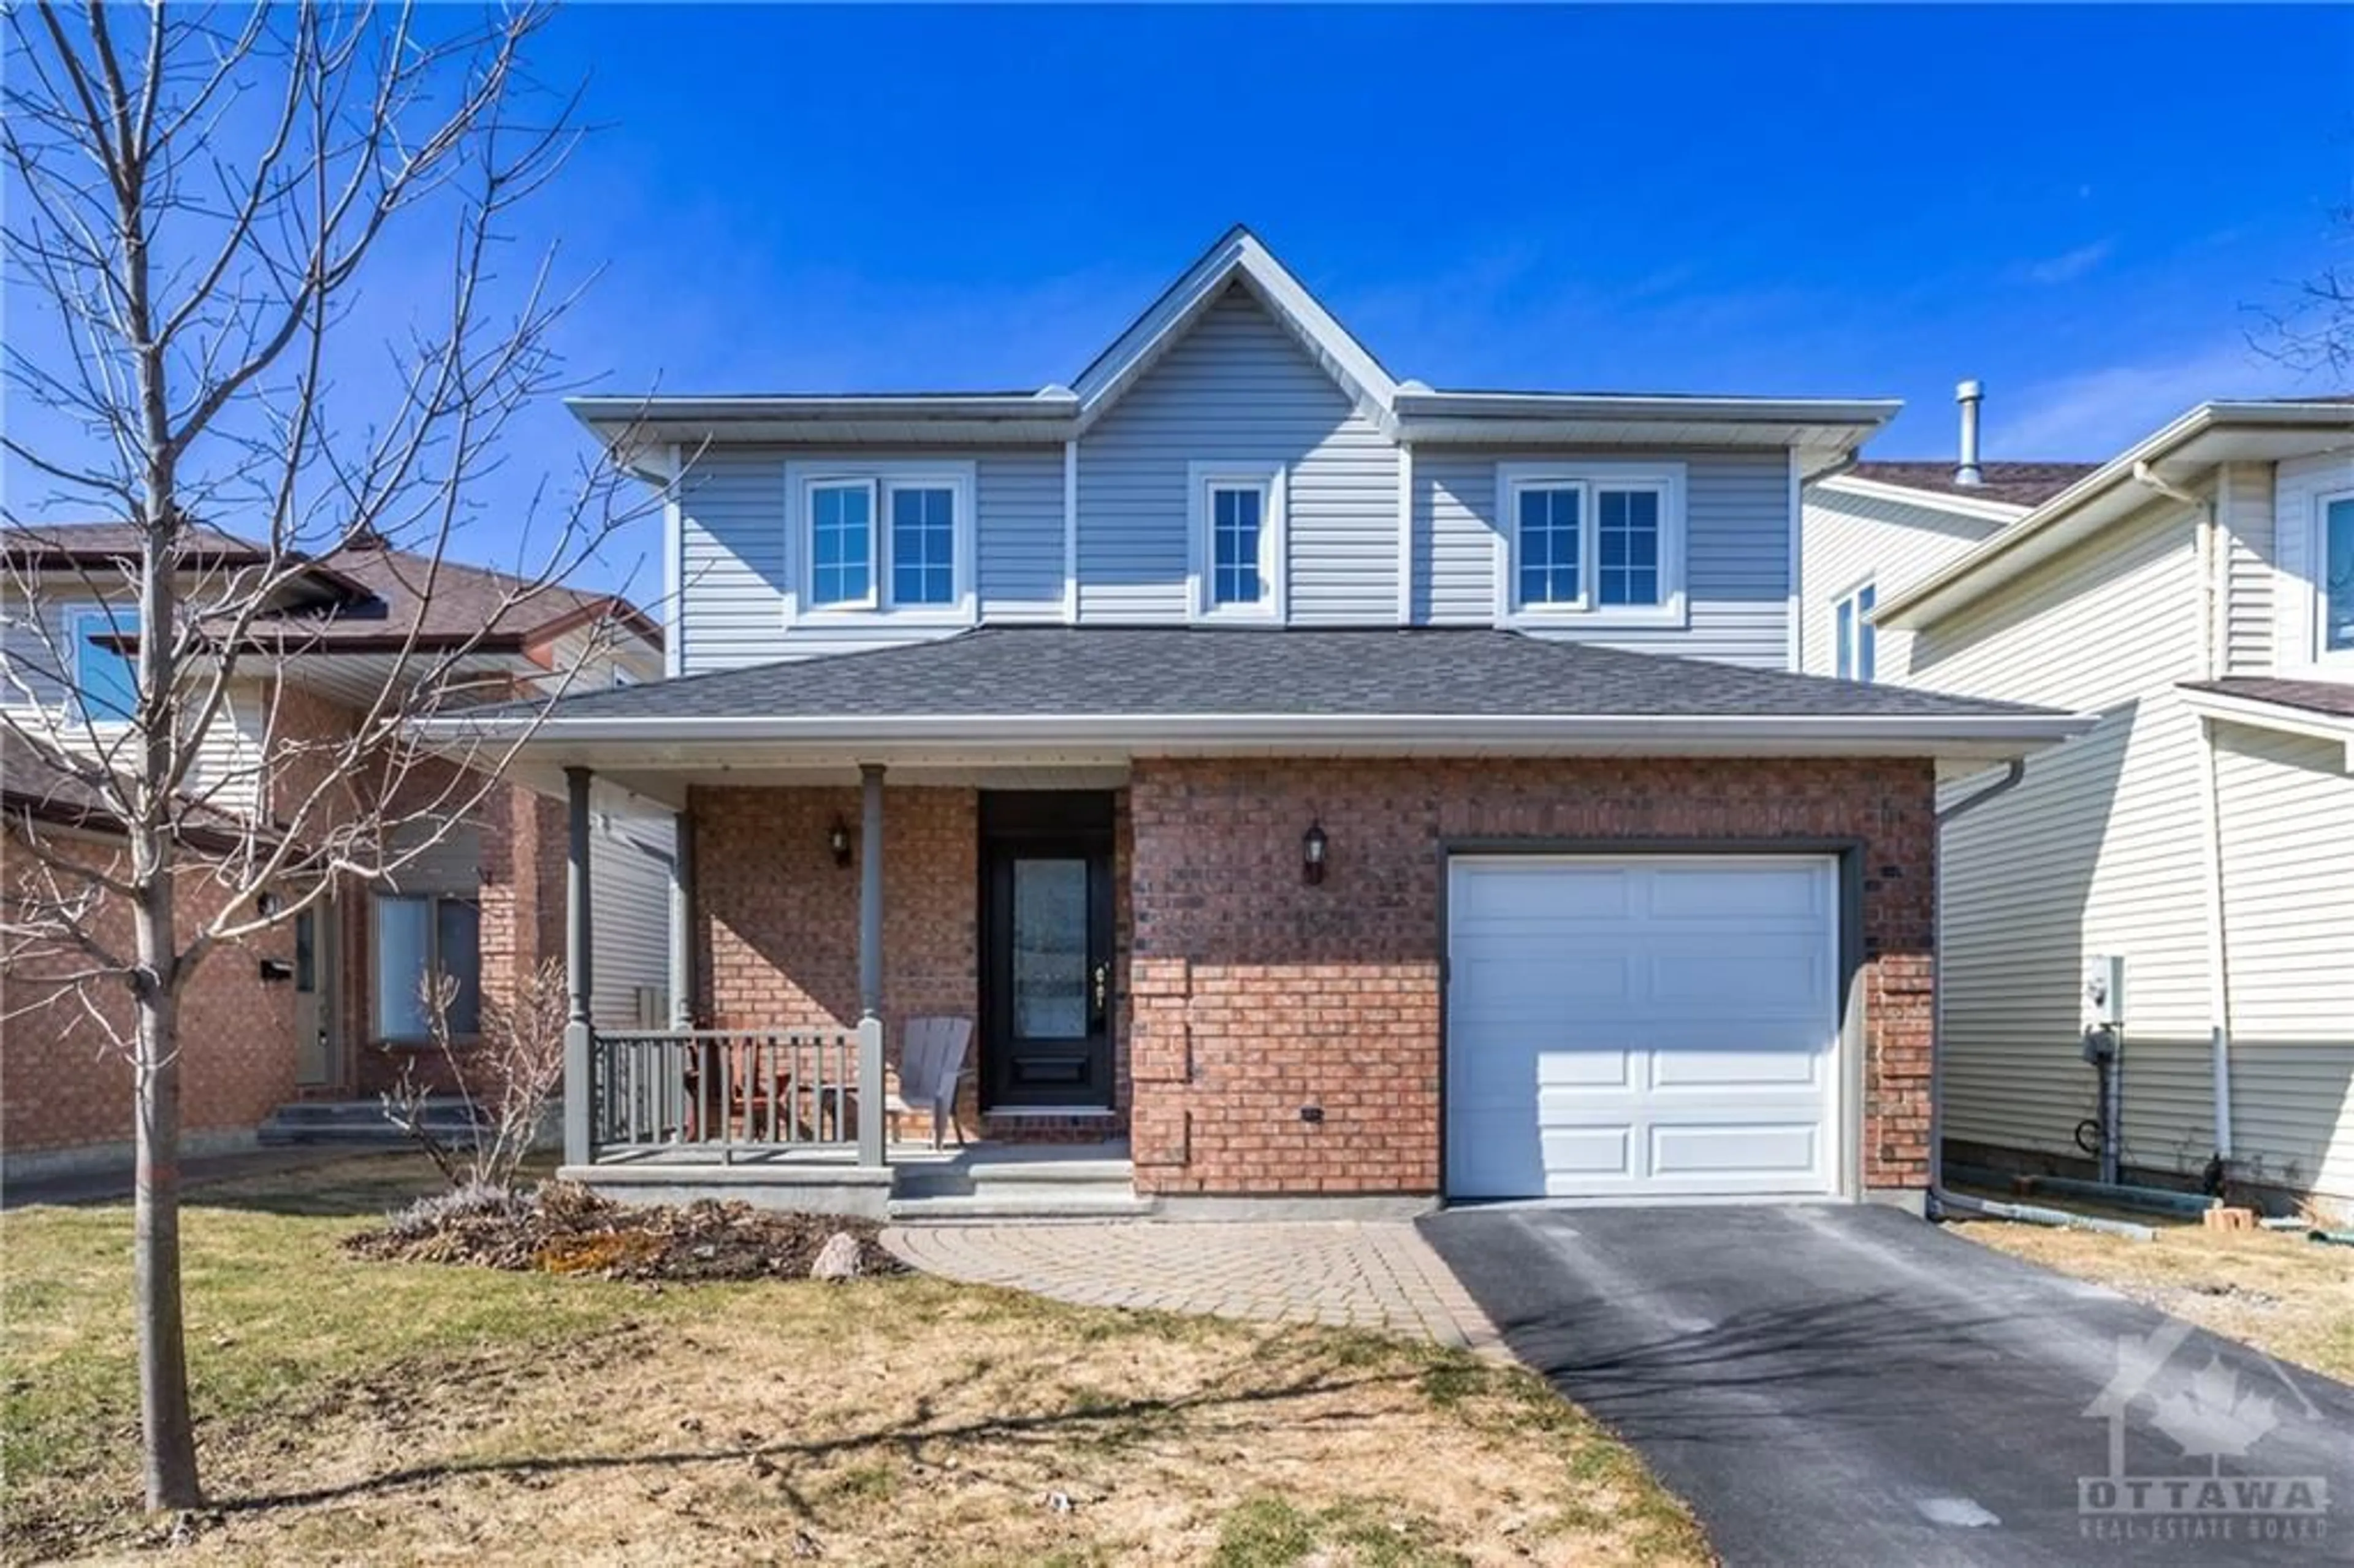 Home with brick exterior material for 1581 DELIA Cres, Orleans Ontario K4A 2X7